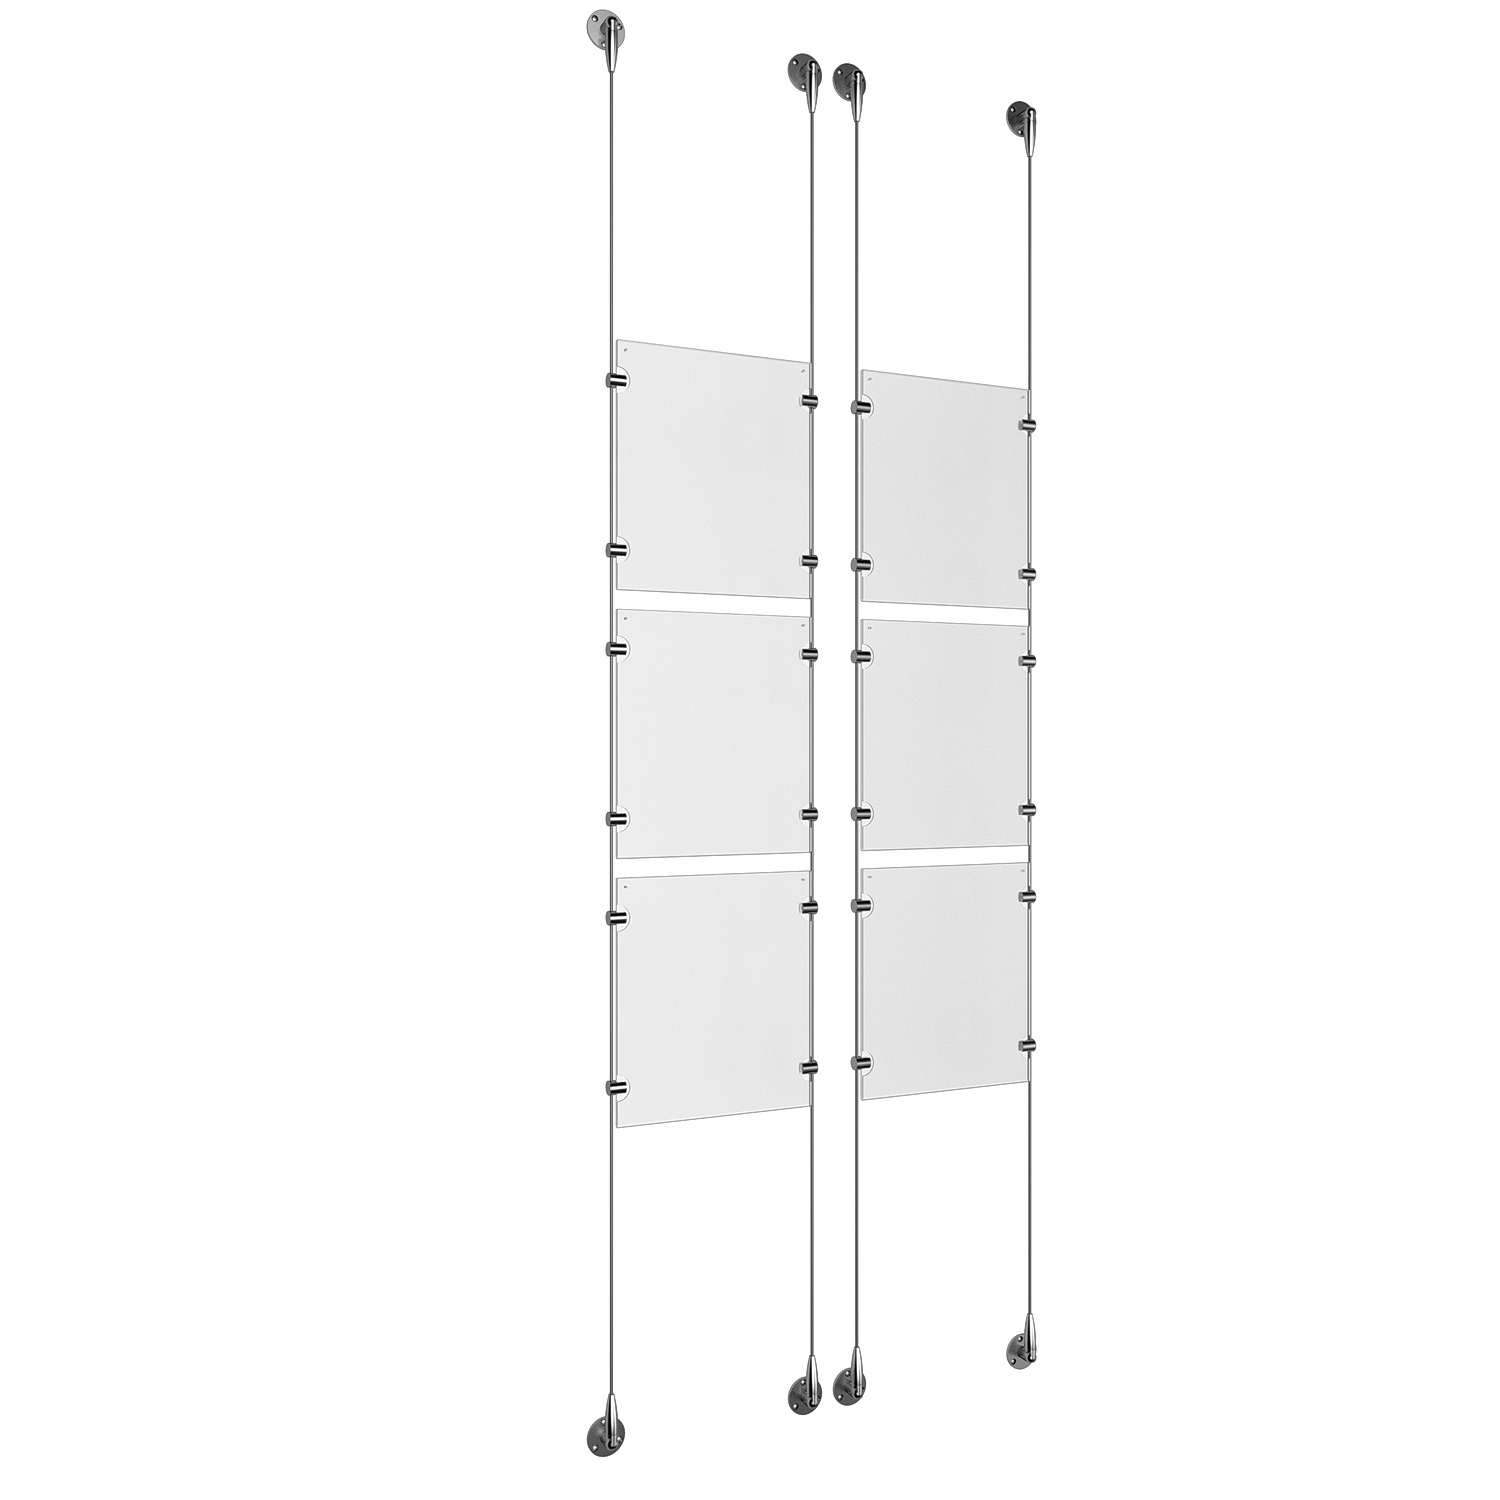 (6) 8-1/2'' Width x 11'' Height Clear Acrylic Frame & (4) Stainless Steel Satin Brushed Adjustable Angle Signature 1/8'' Cable Systems with (24) Single-Sided Panel Grippers